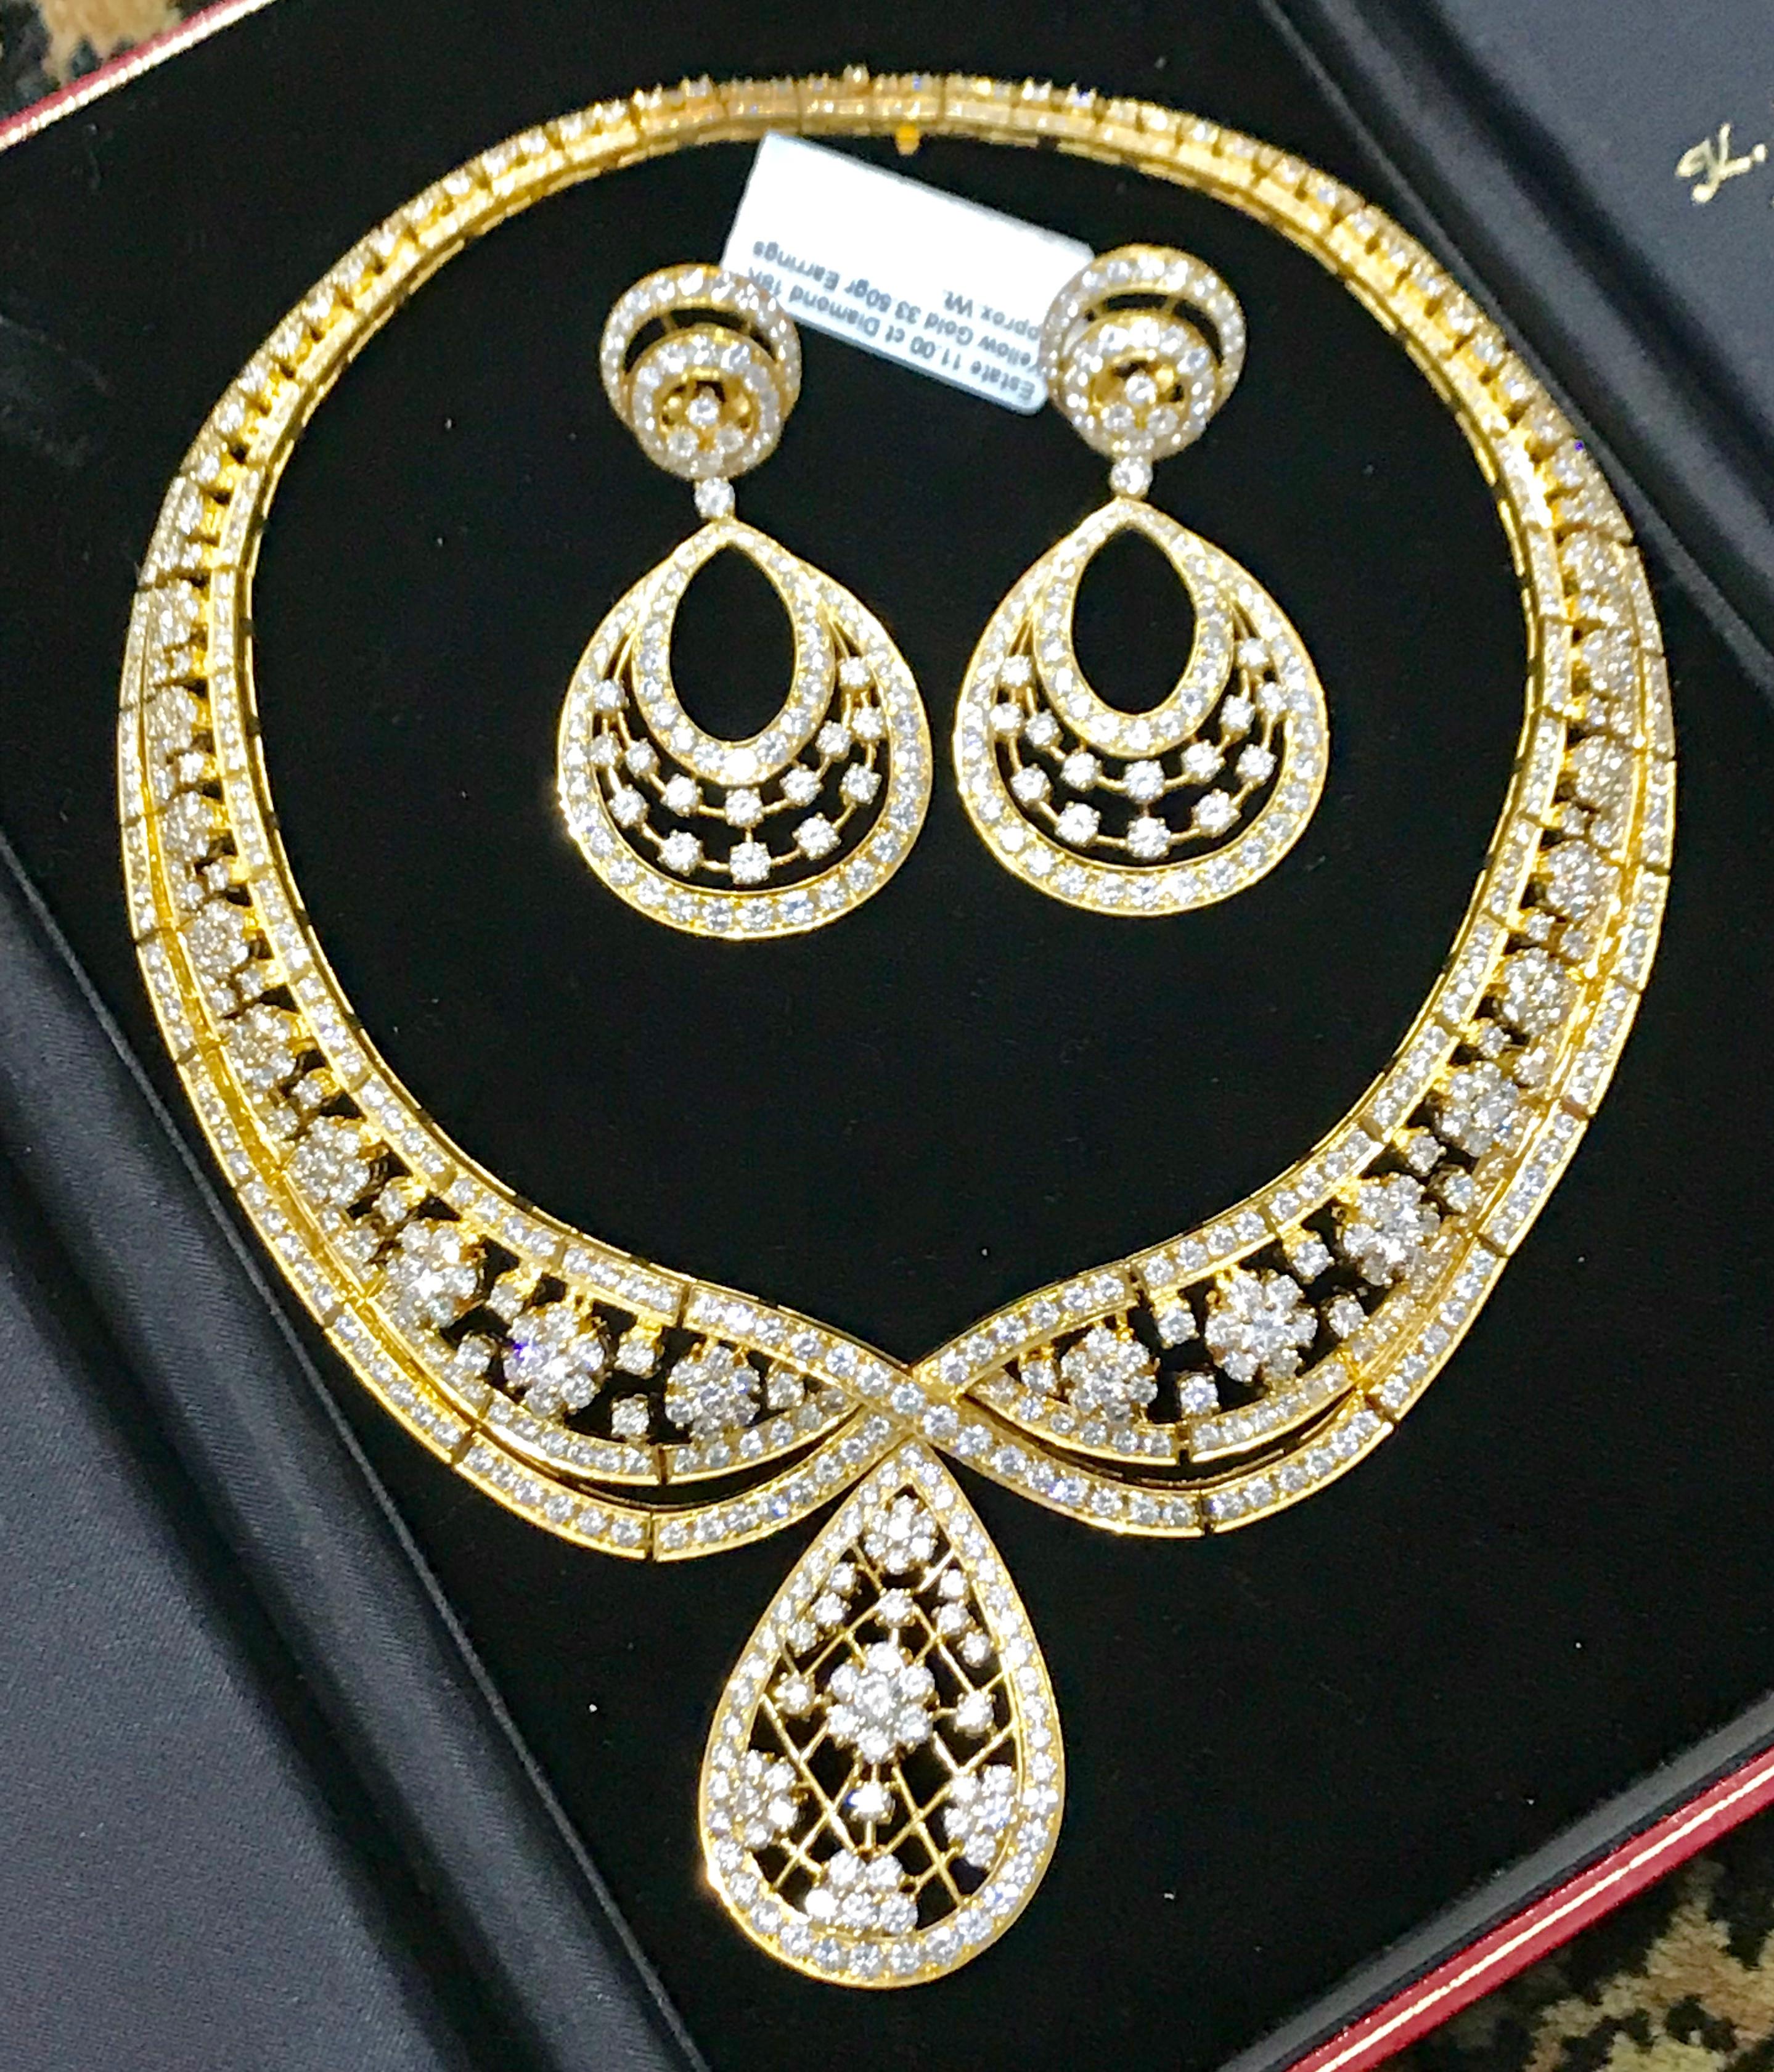 One of our premium neckalce and earring set  from our Bridal collection.
37 carats of VS quality of Diamonds all mounted in 18 karat yellow gold. Weight of the necklace and earrings is 185 grams. The pendulum of necklace can be taken out to make it